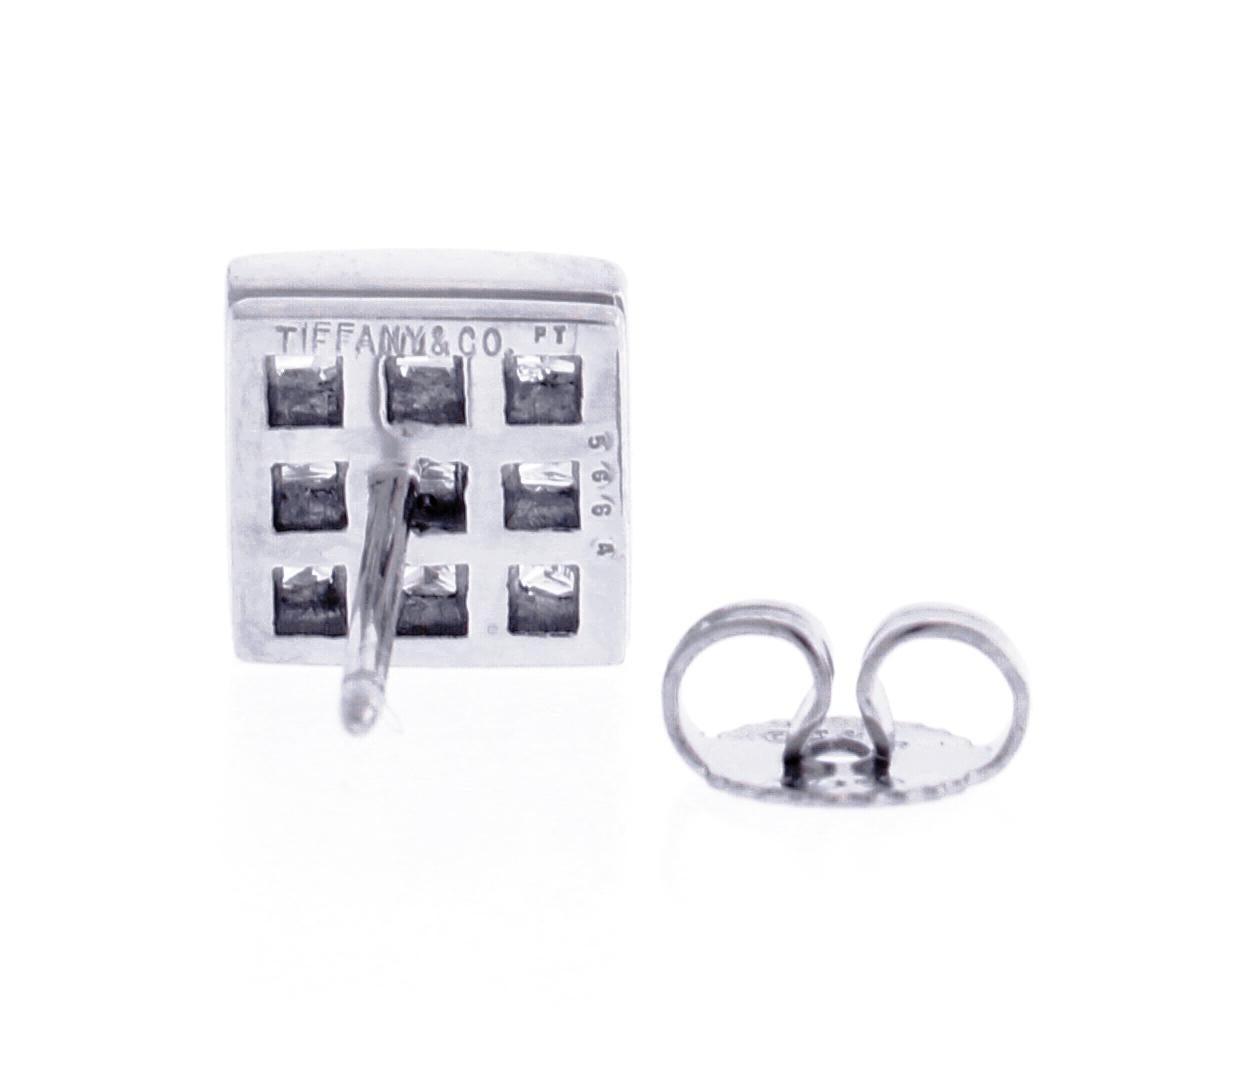 From Tiffany & Co. a pair of square invisible set diamond earrings
♦ Designer: Tiffany & Co.
♦ Metal: Platinum
♦ 18 Princess cut diamonds=1.40 carats, F-G VS
♦ 8.5mm square
♦ Circa 2000
♦ Packaging: Tiffany Boxes
♦ Condition: Very good , pre-owned
♦